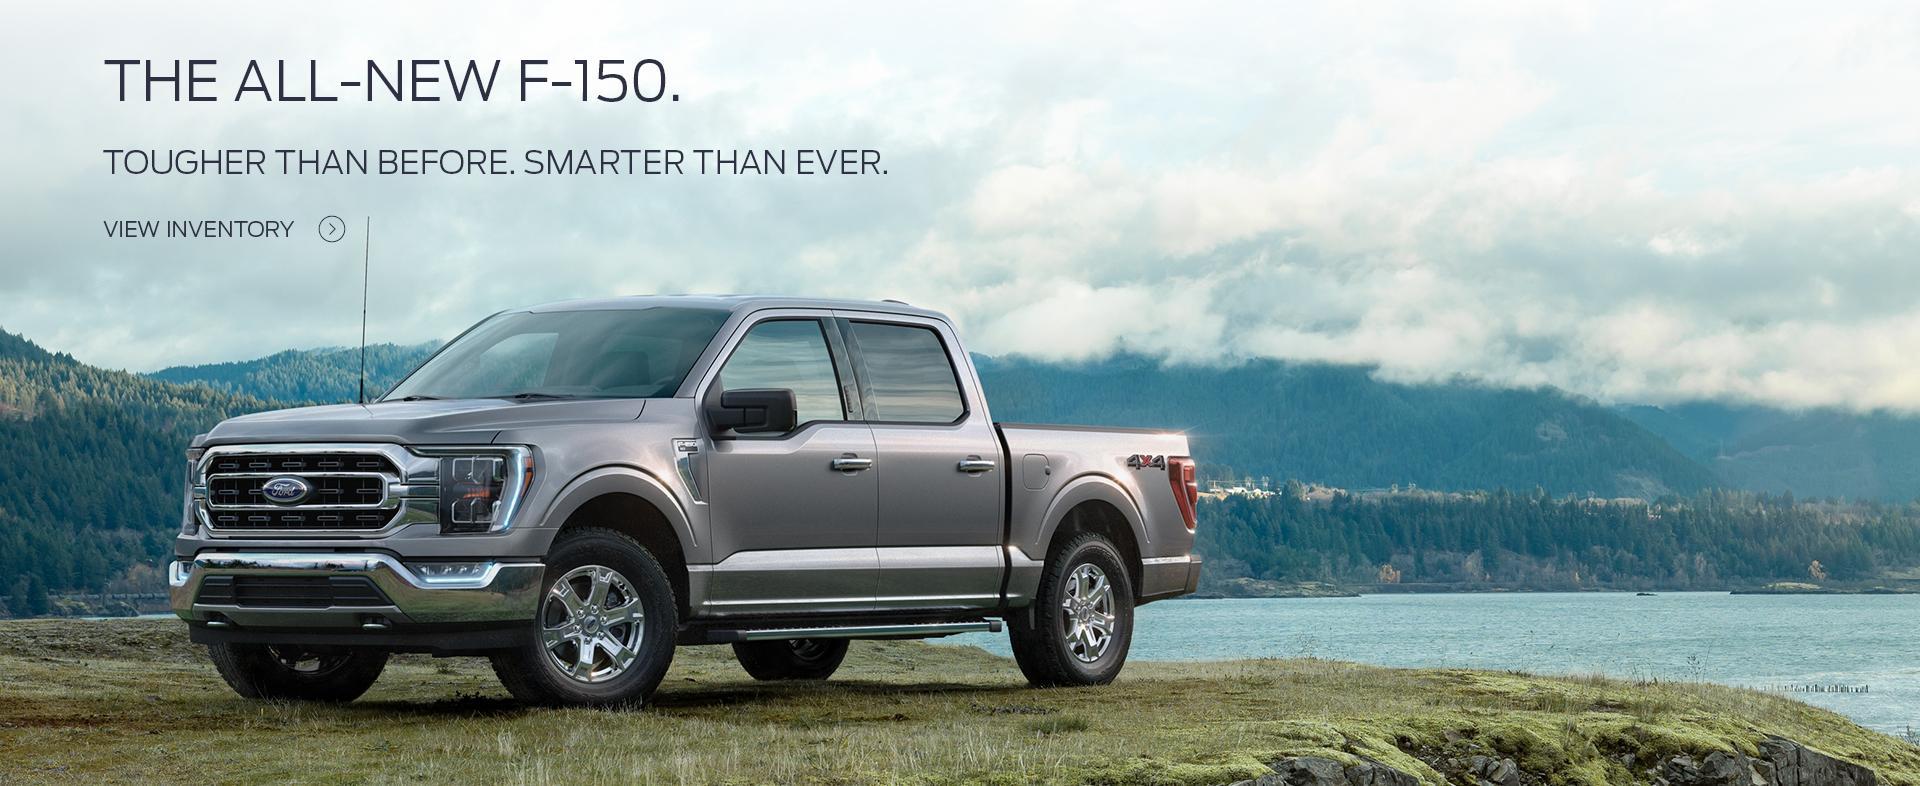 2021 Ford F-150 | George Stockfish Ford Sales